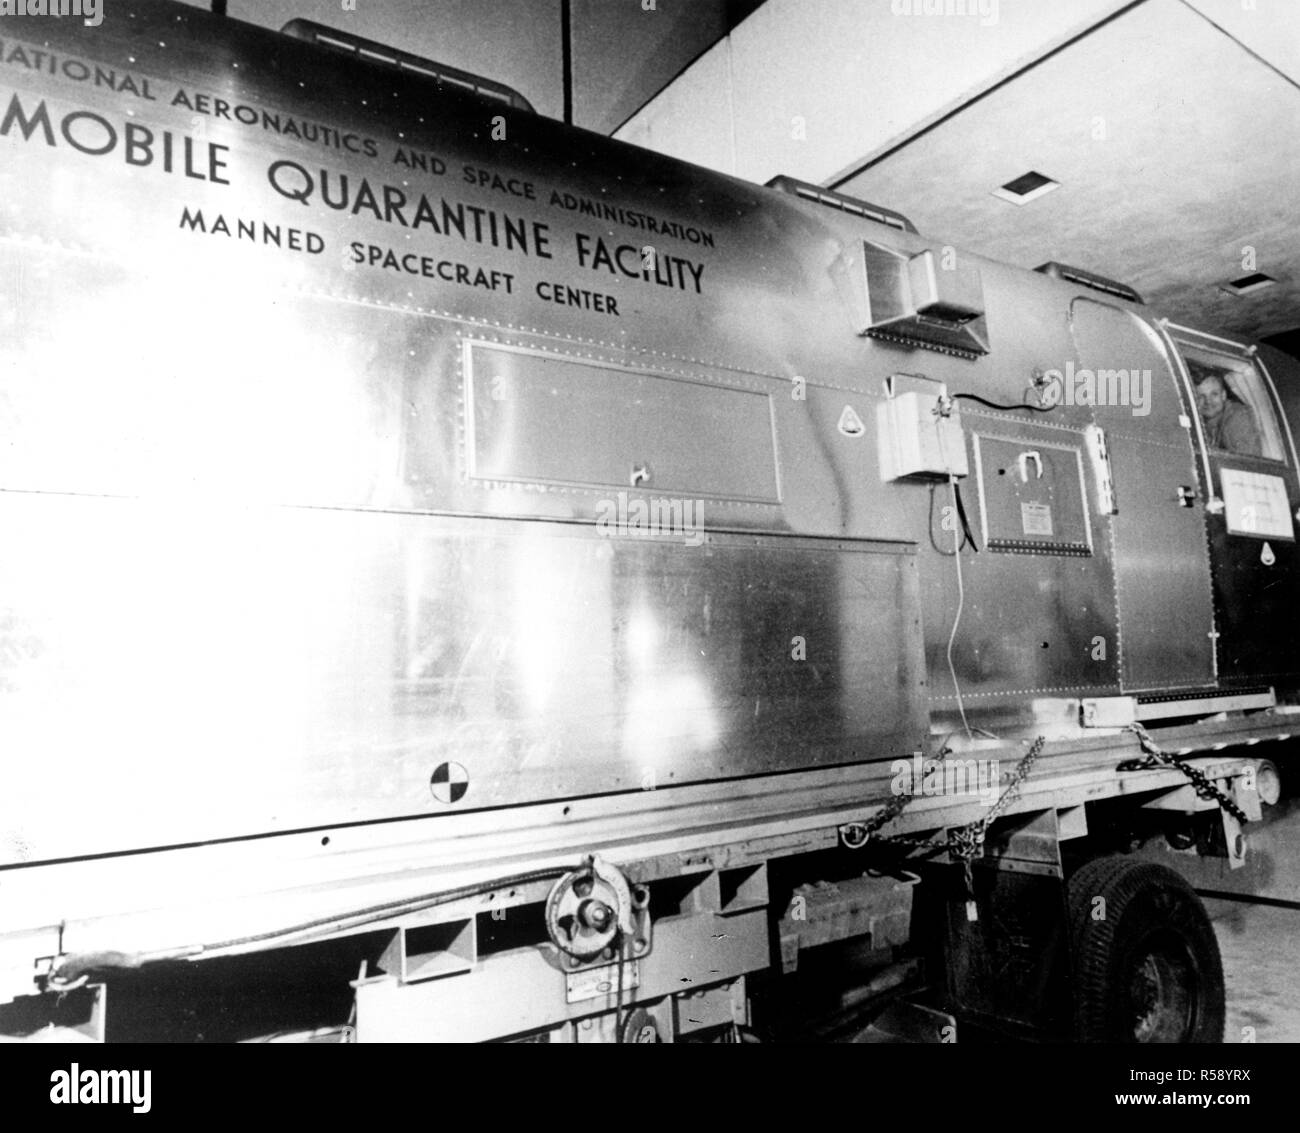 Mobile Quarantine Facility (MQF) which served as their home until they reached the NASA Manned Spacecraft Center (MSC) Lunar Receiving Laboratory in Houston, Texas. Stock Photo